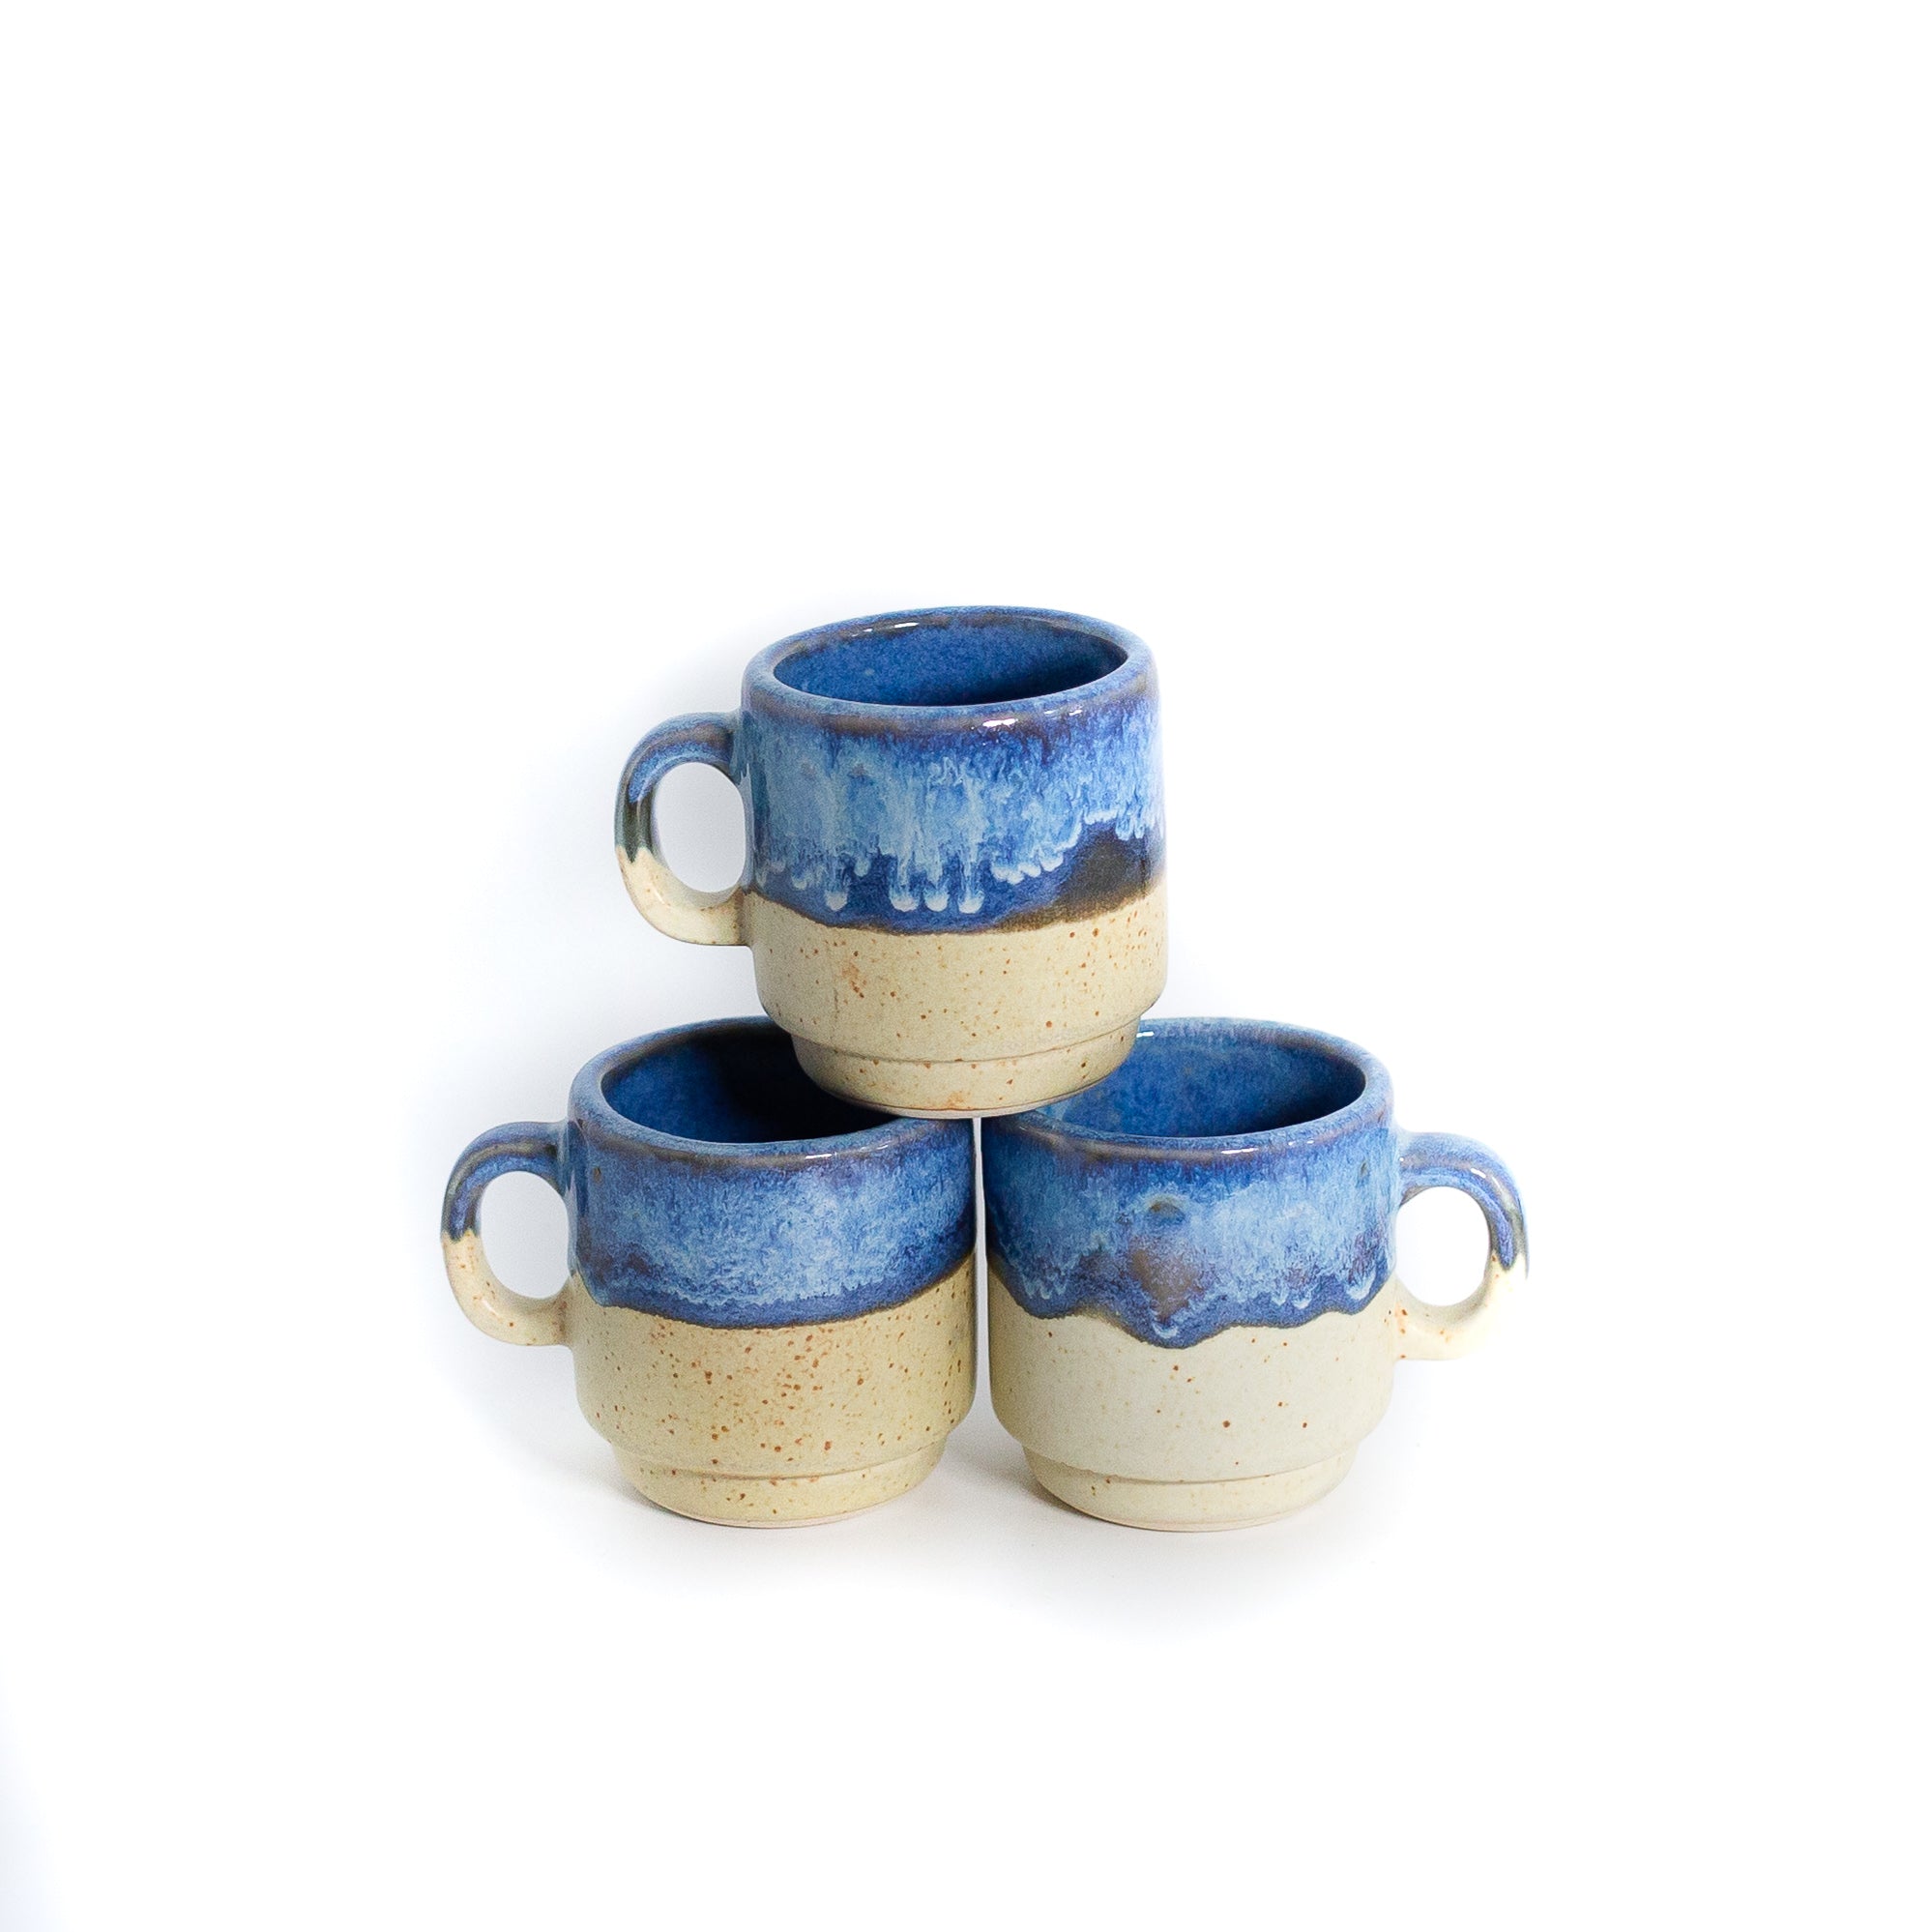 Small blue and cream coffee mugs stacked on white background